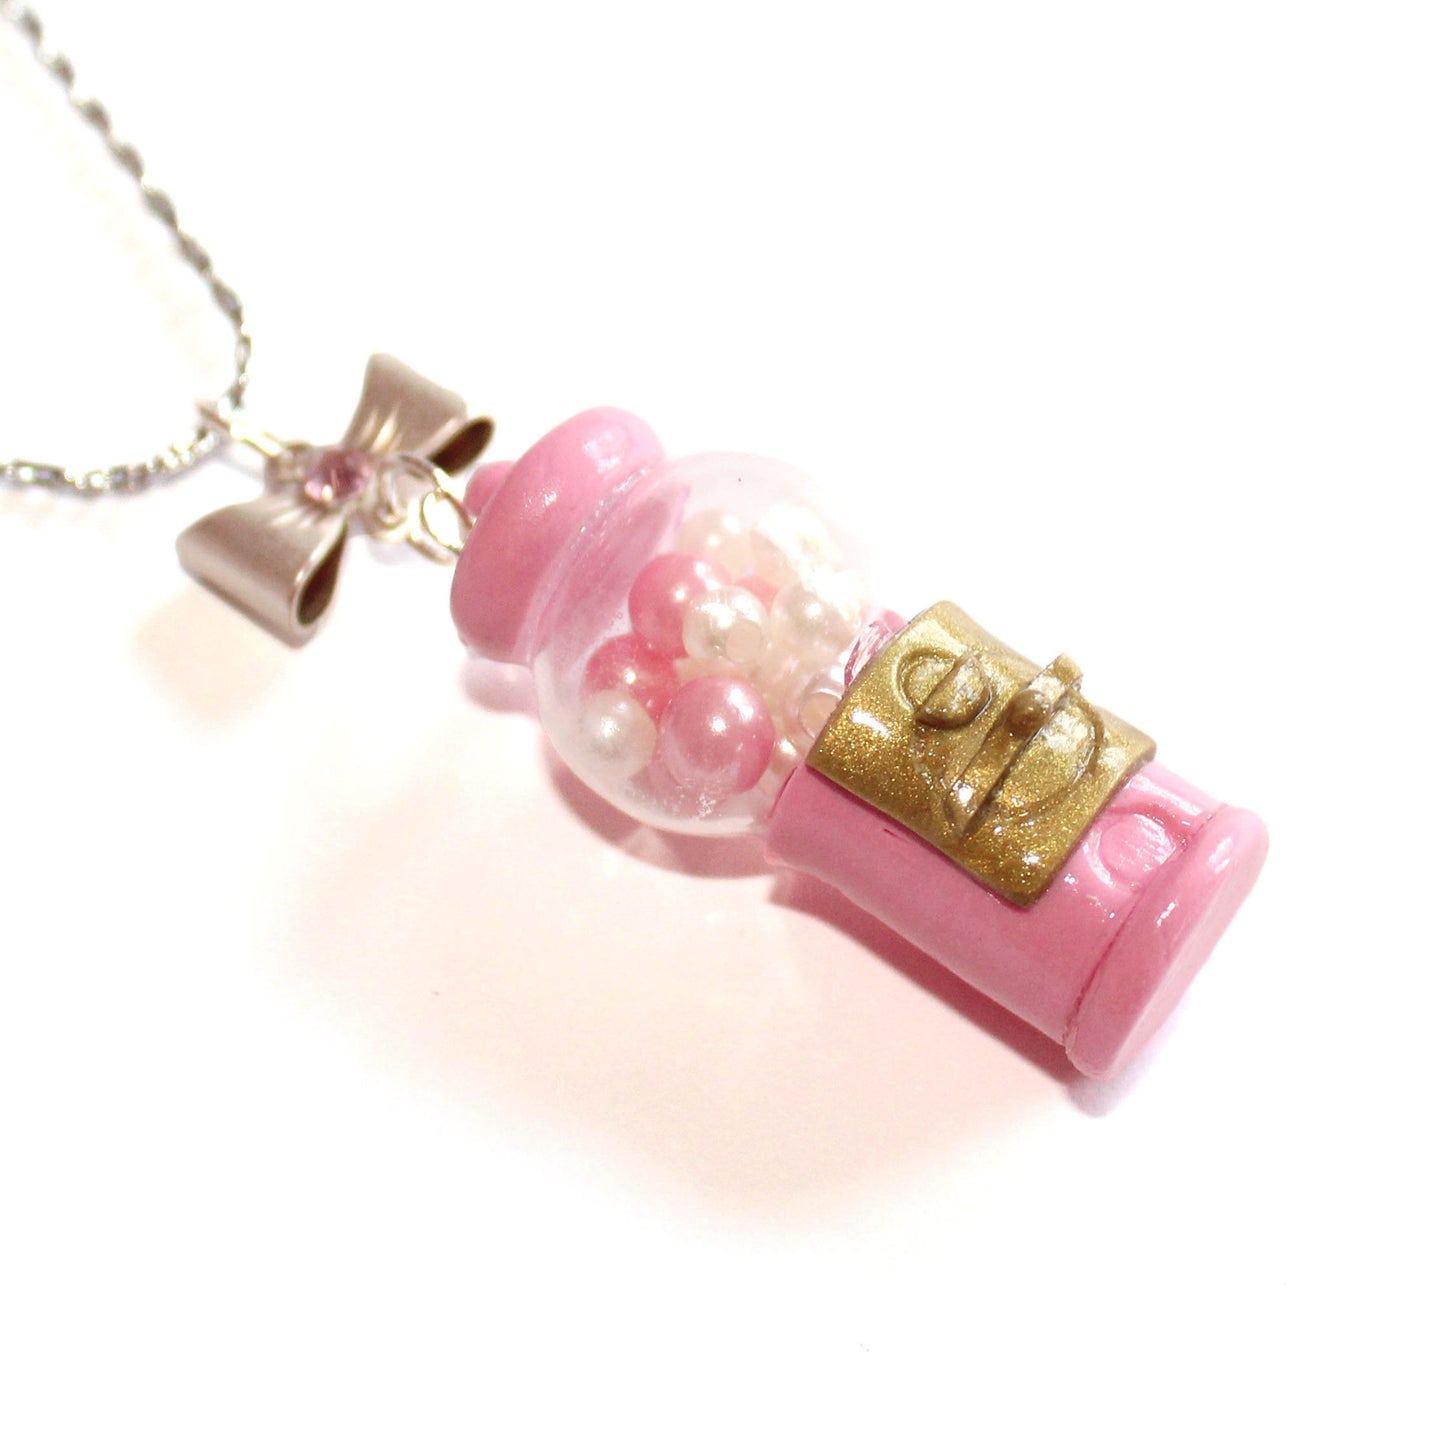 Pink Gumball Machine Necklace or Charm